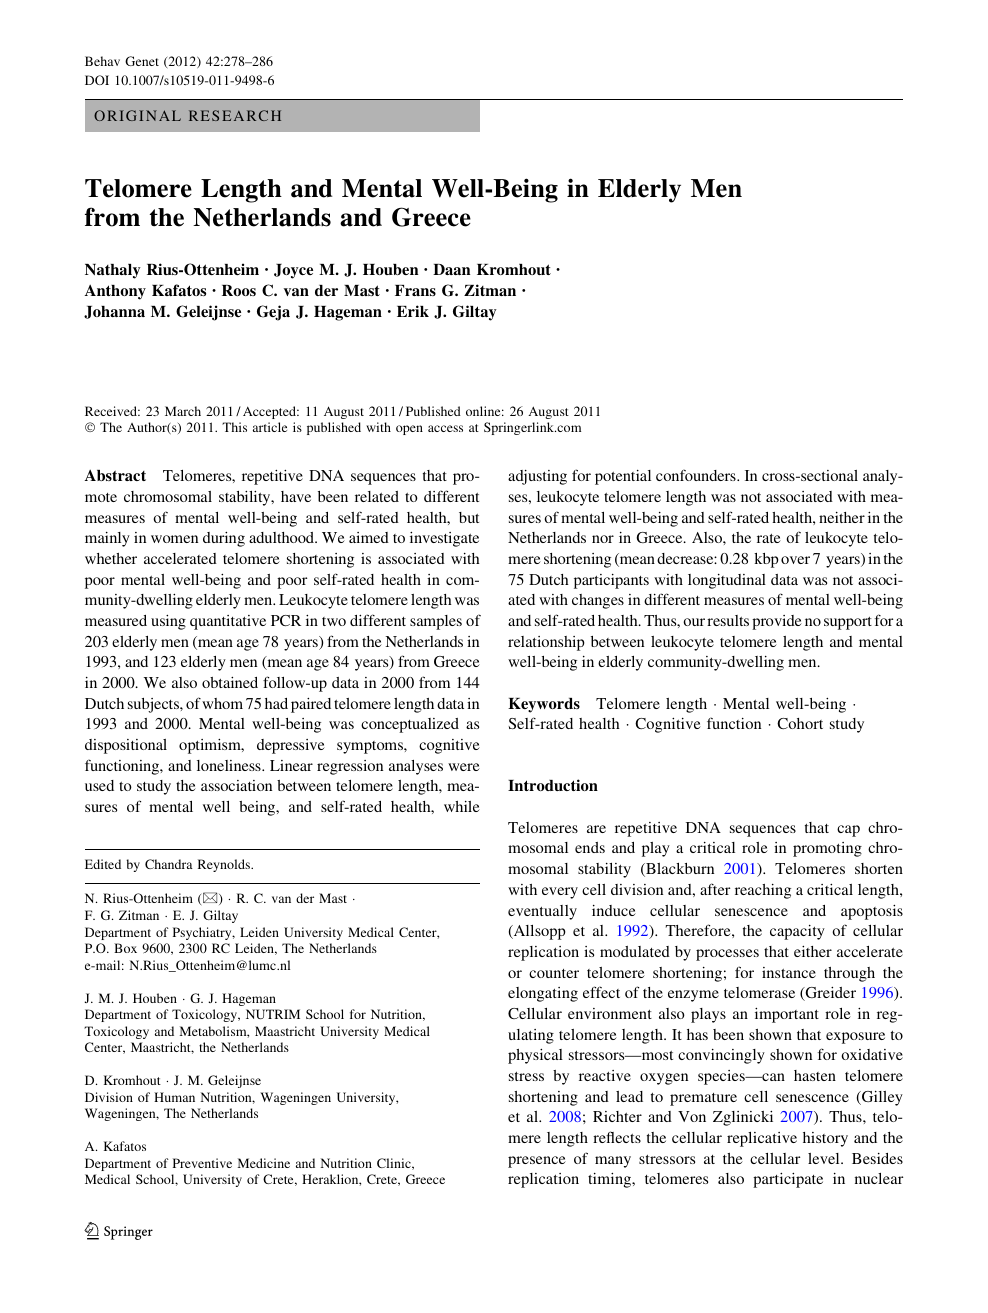 Telomere Length And Mental Well Being In Elderly Men From The Netherlands And Greece Topic Of Research Paper In Clinical Medicine Download Scholarly Article Pdf And Read For Free On Cyberleninka Open